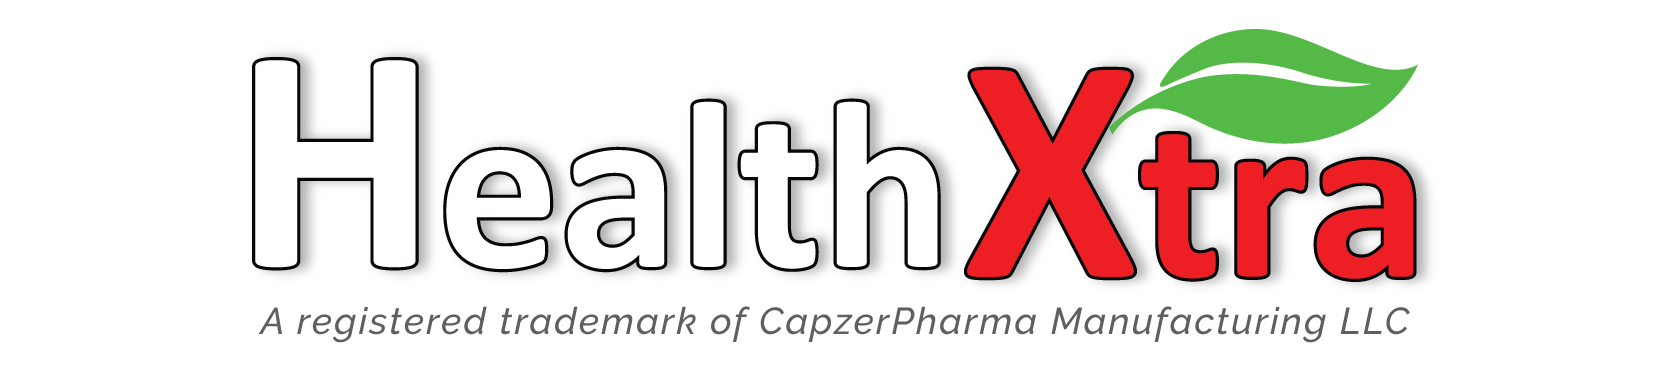 HealthXtra Supplements | Vitamins for Health & Wellness